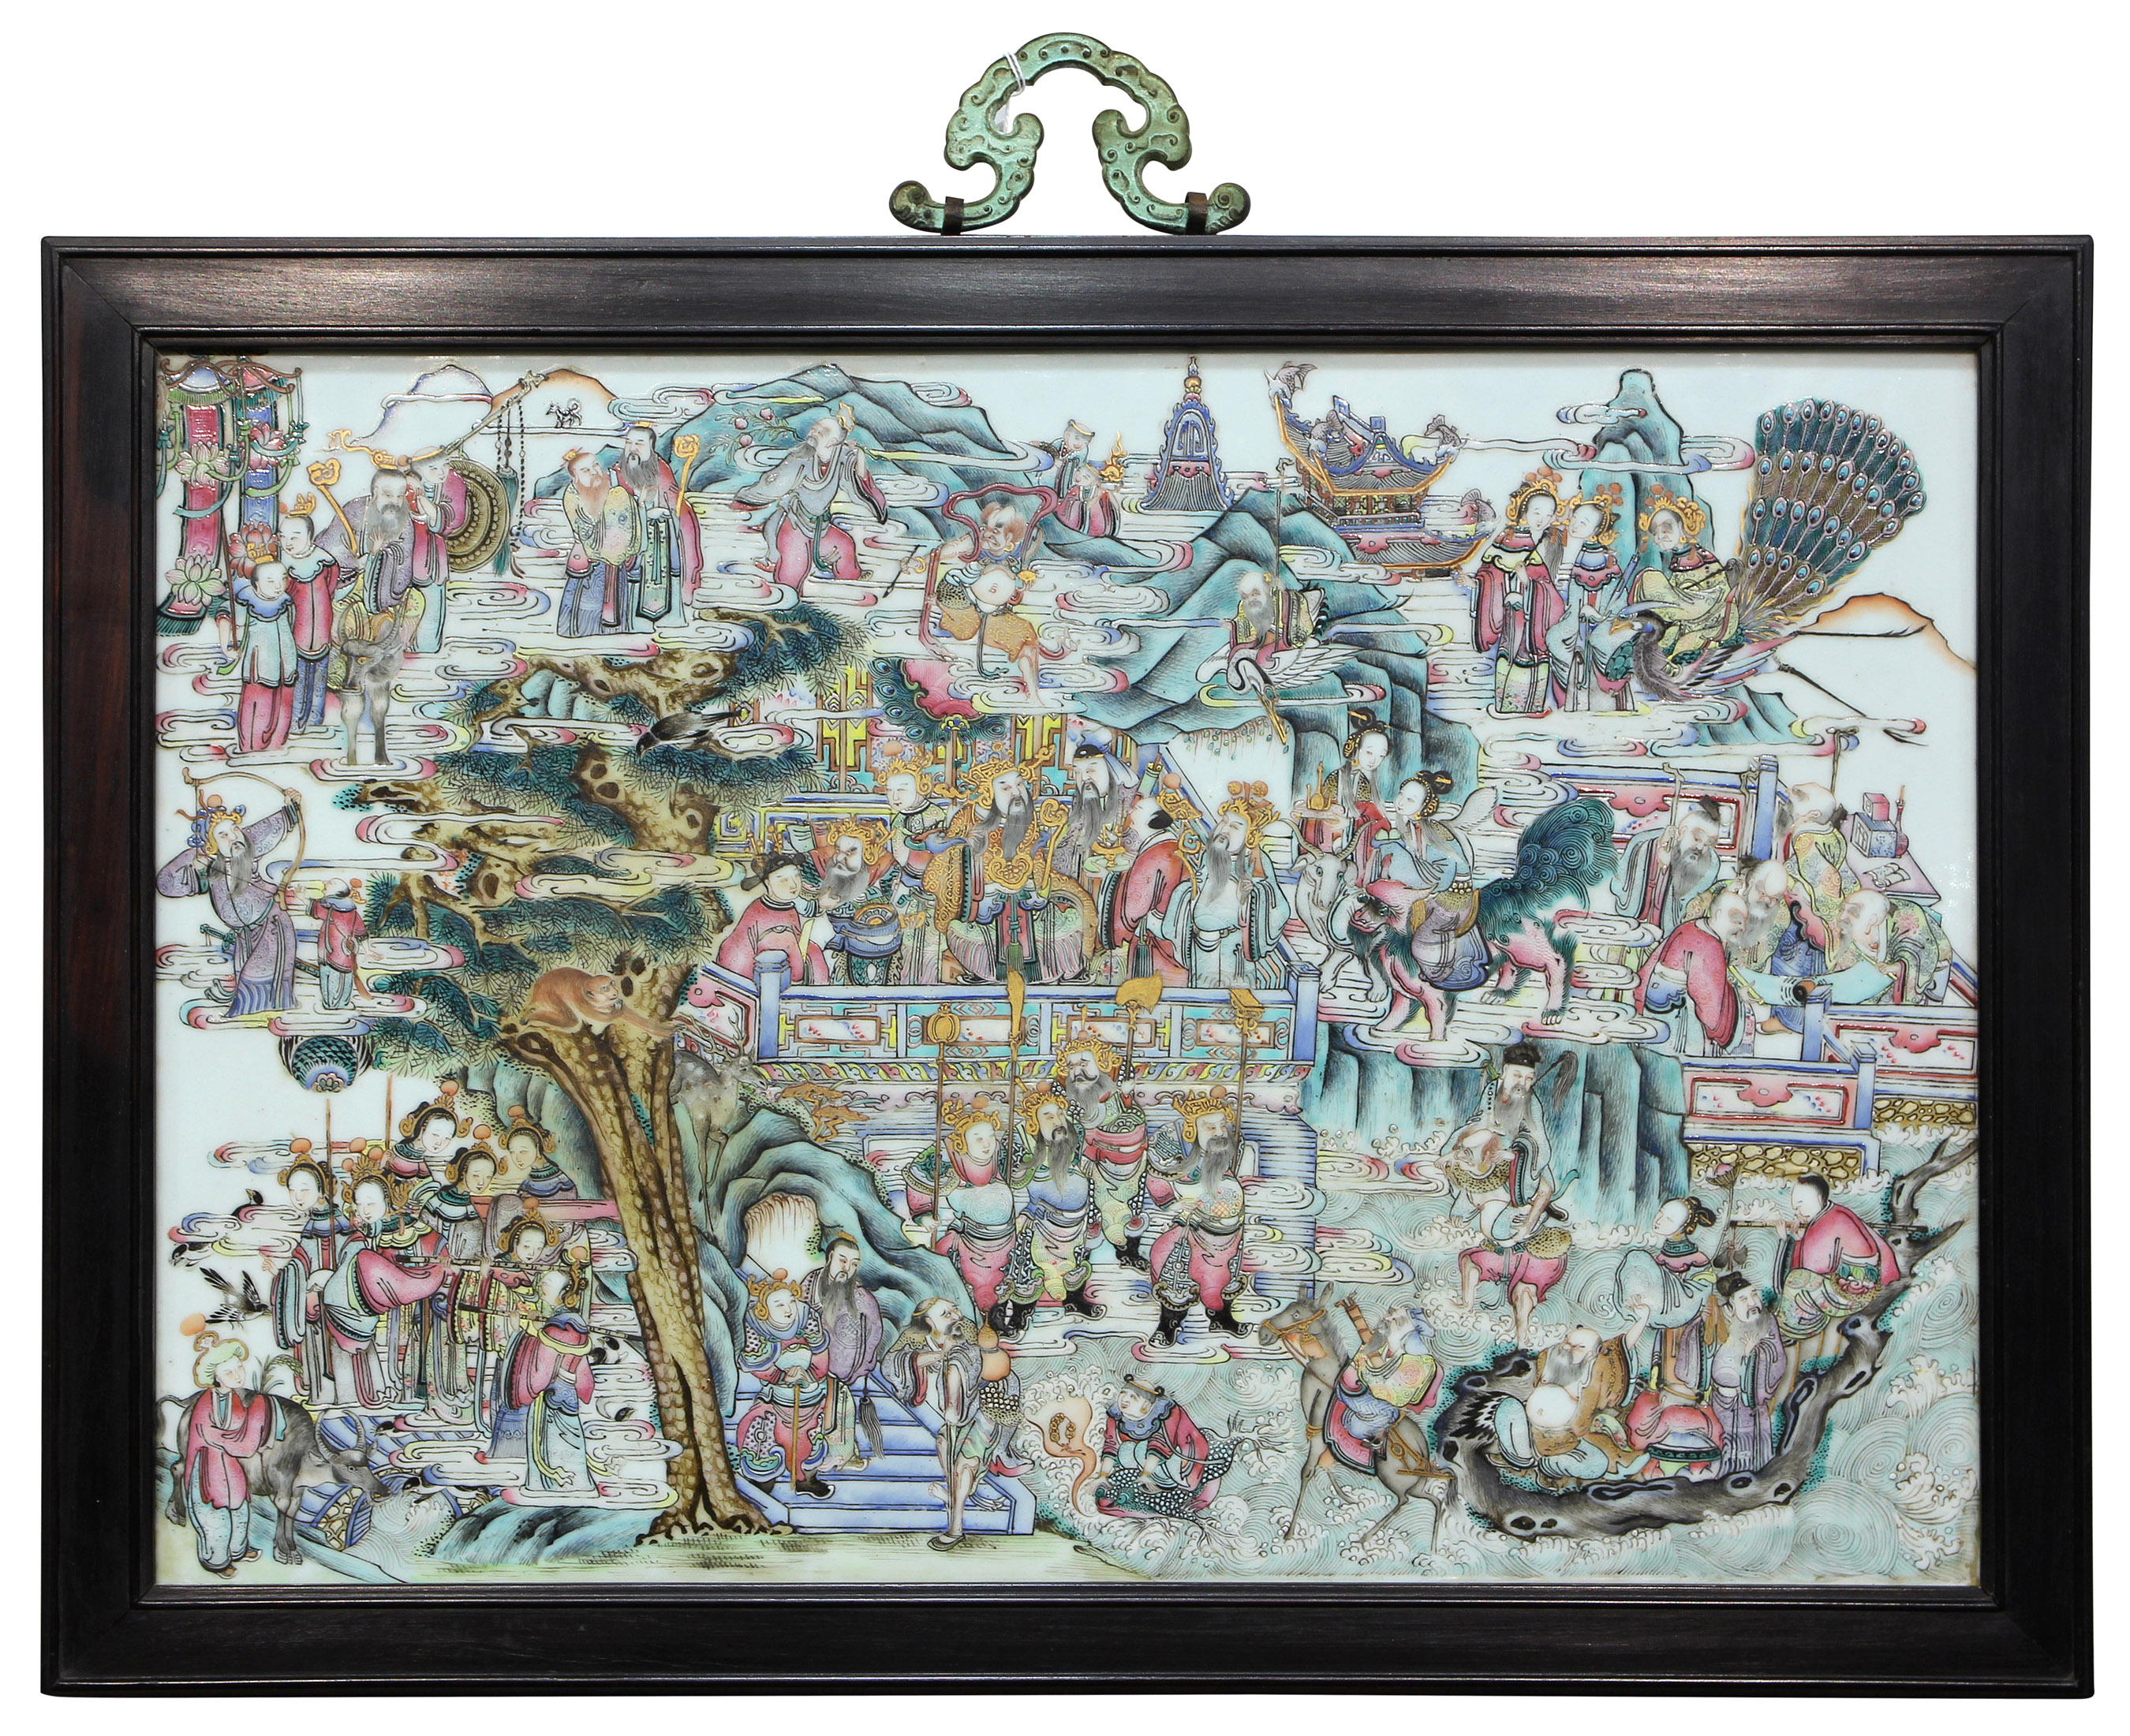 Intense bidding on this Chinese enameled plaque drove the price to $27,300, well over its $400-$600 estimate. Clars Auction Gallery image